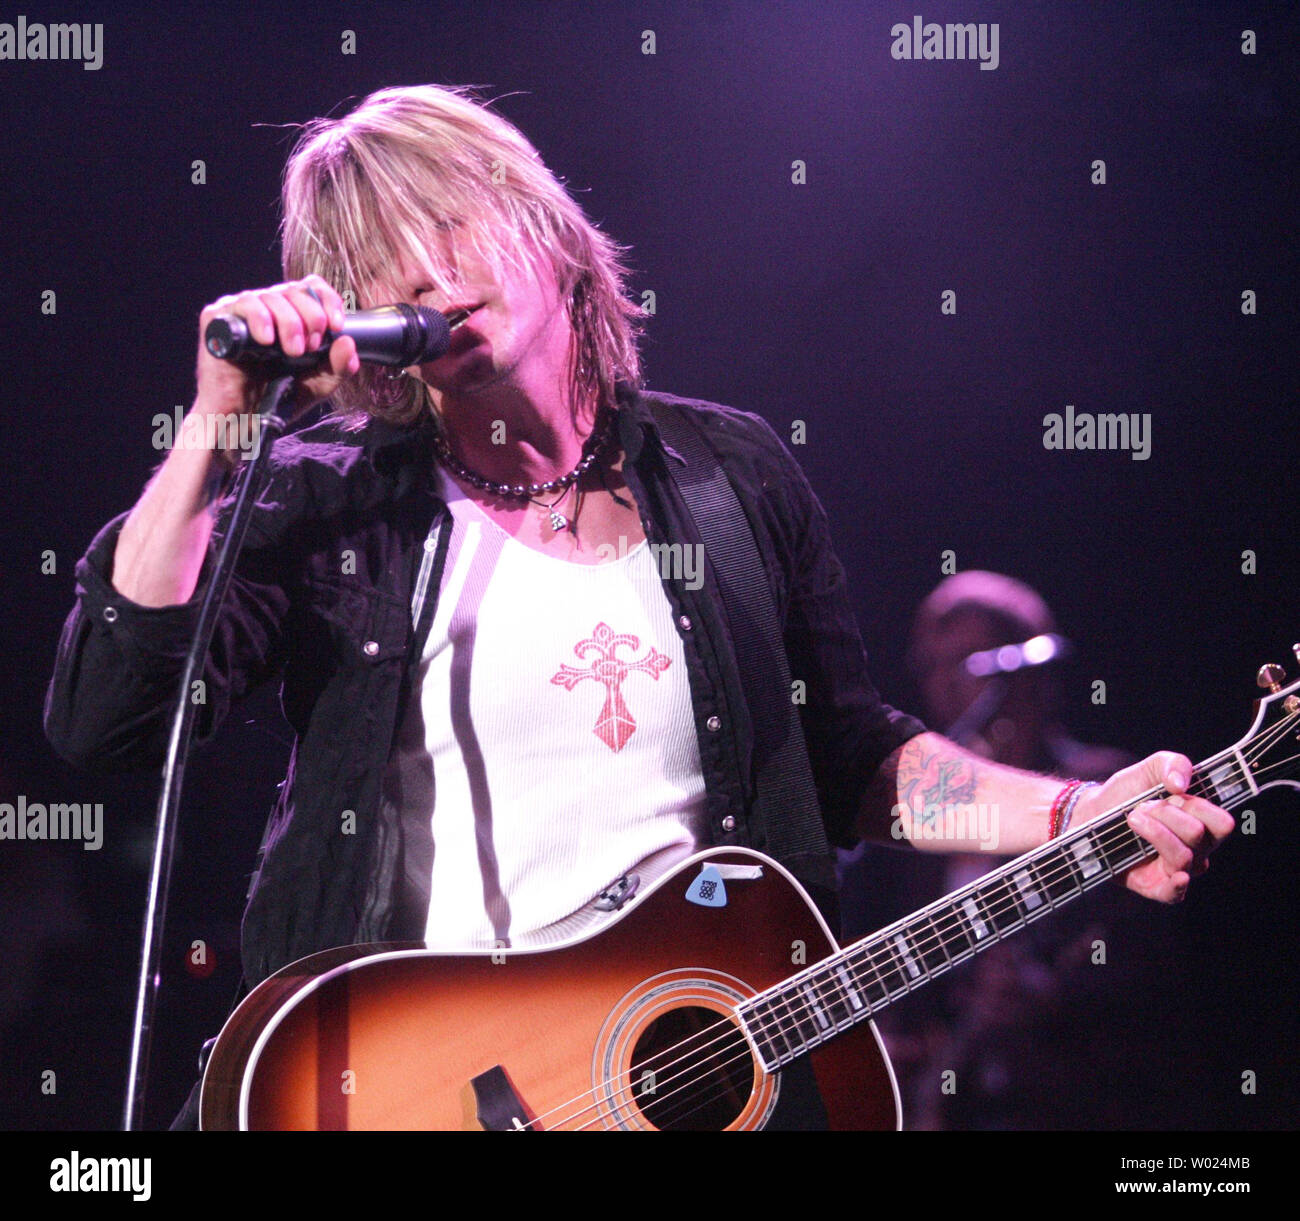 Ferie Intakt Soak Goo Goo Dolls, singer, Johnny Rzeznik plays from their new CD "Live in  Buffalo" at Pechanga Indian Reservation in Temecula CA, December 30, 2004.  (UPI Photo/Roger Williams Stock Photo - Alamy